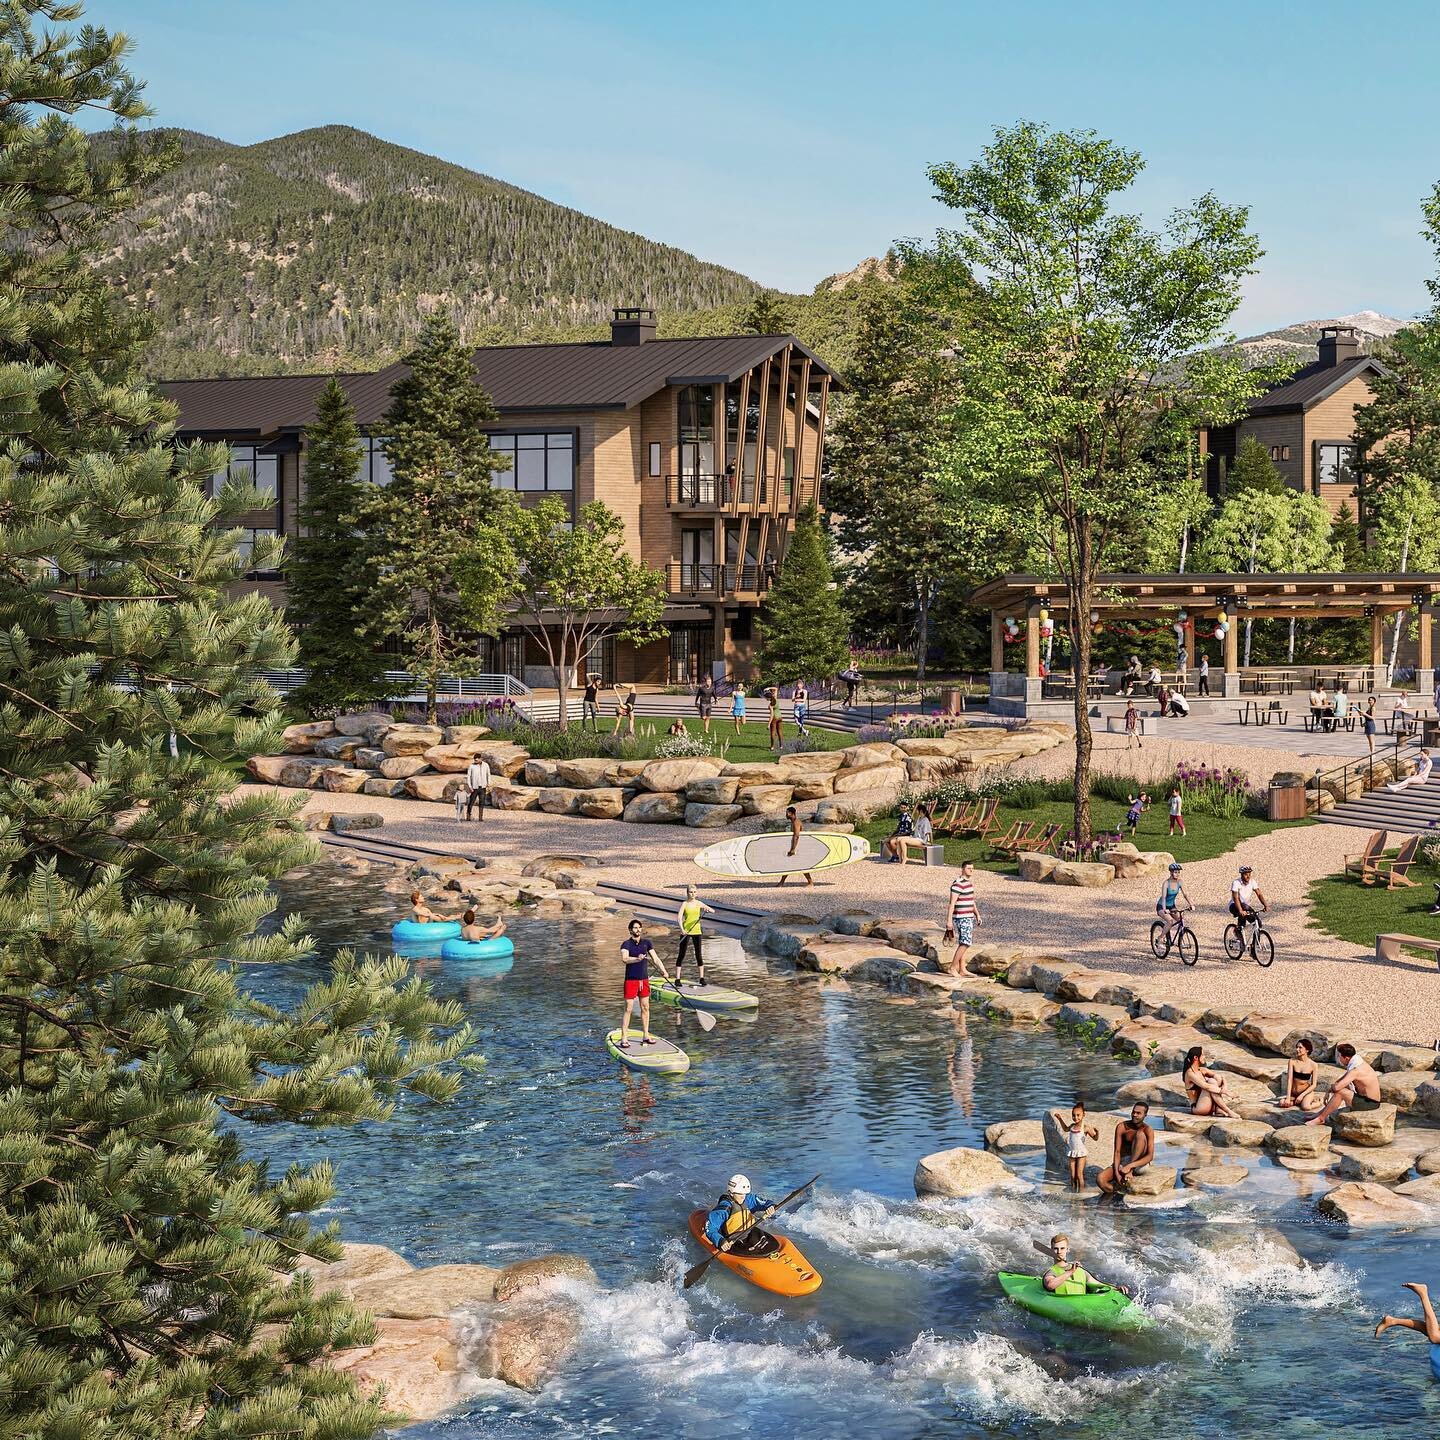 Happy Friday! 
Here is a fun render we did with @359design for the new Town of Vail Masterplan. 
.
.
.

#archviz #architecture #architecturevisualization #photorealism #interiordesign #cgi #3dsmax #coronarender #vray #archdaily #renderzone #renderwee